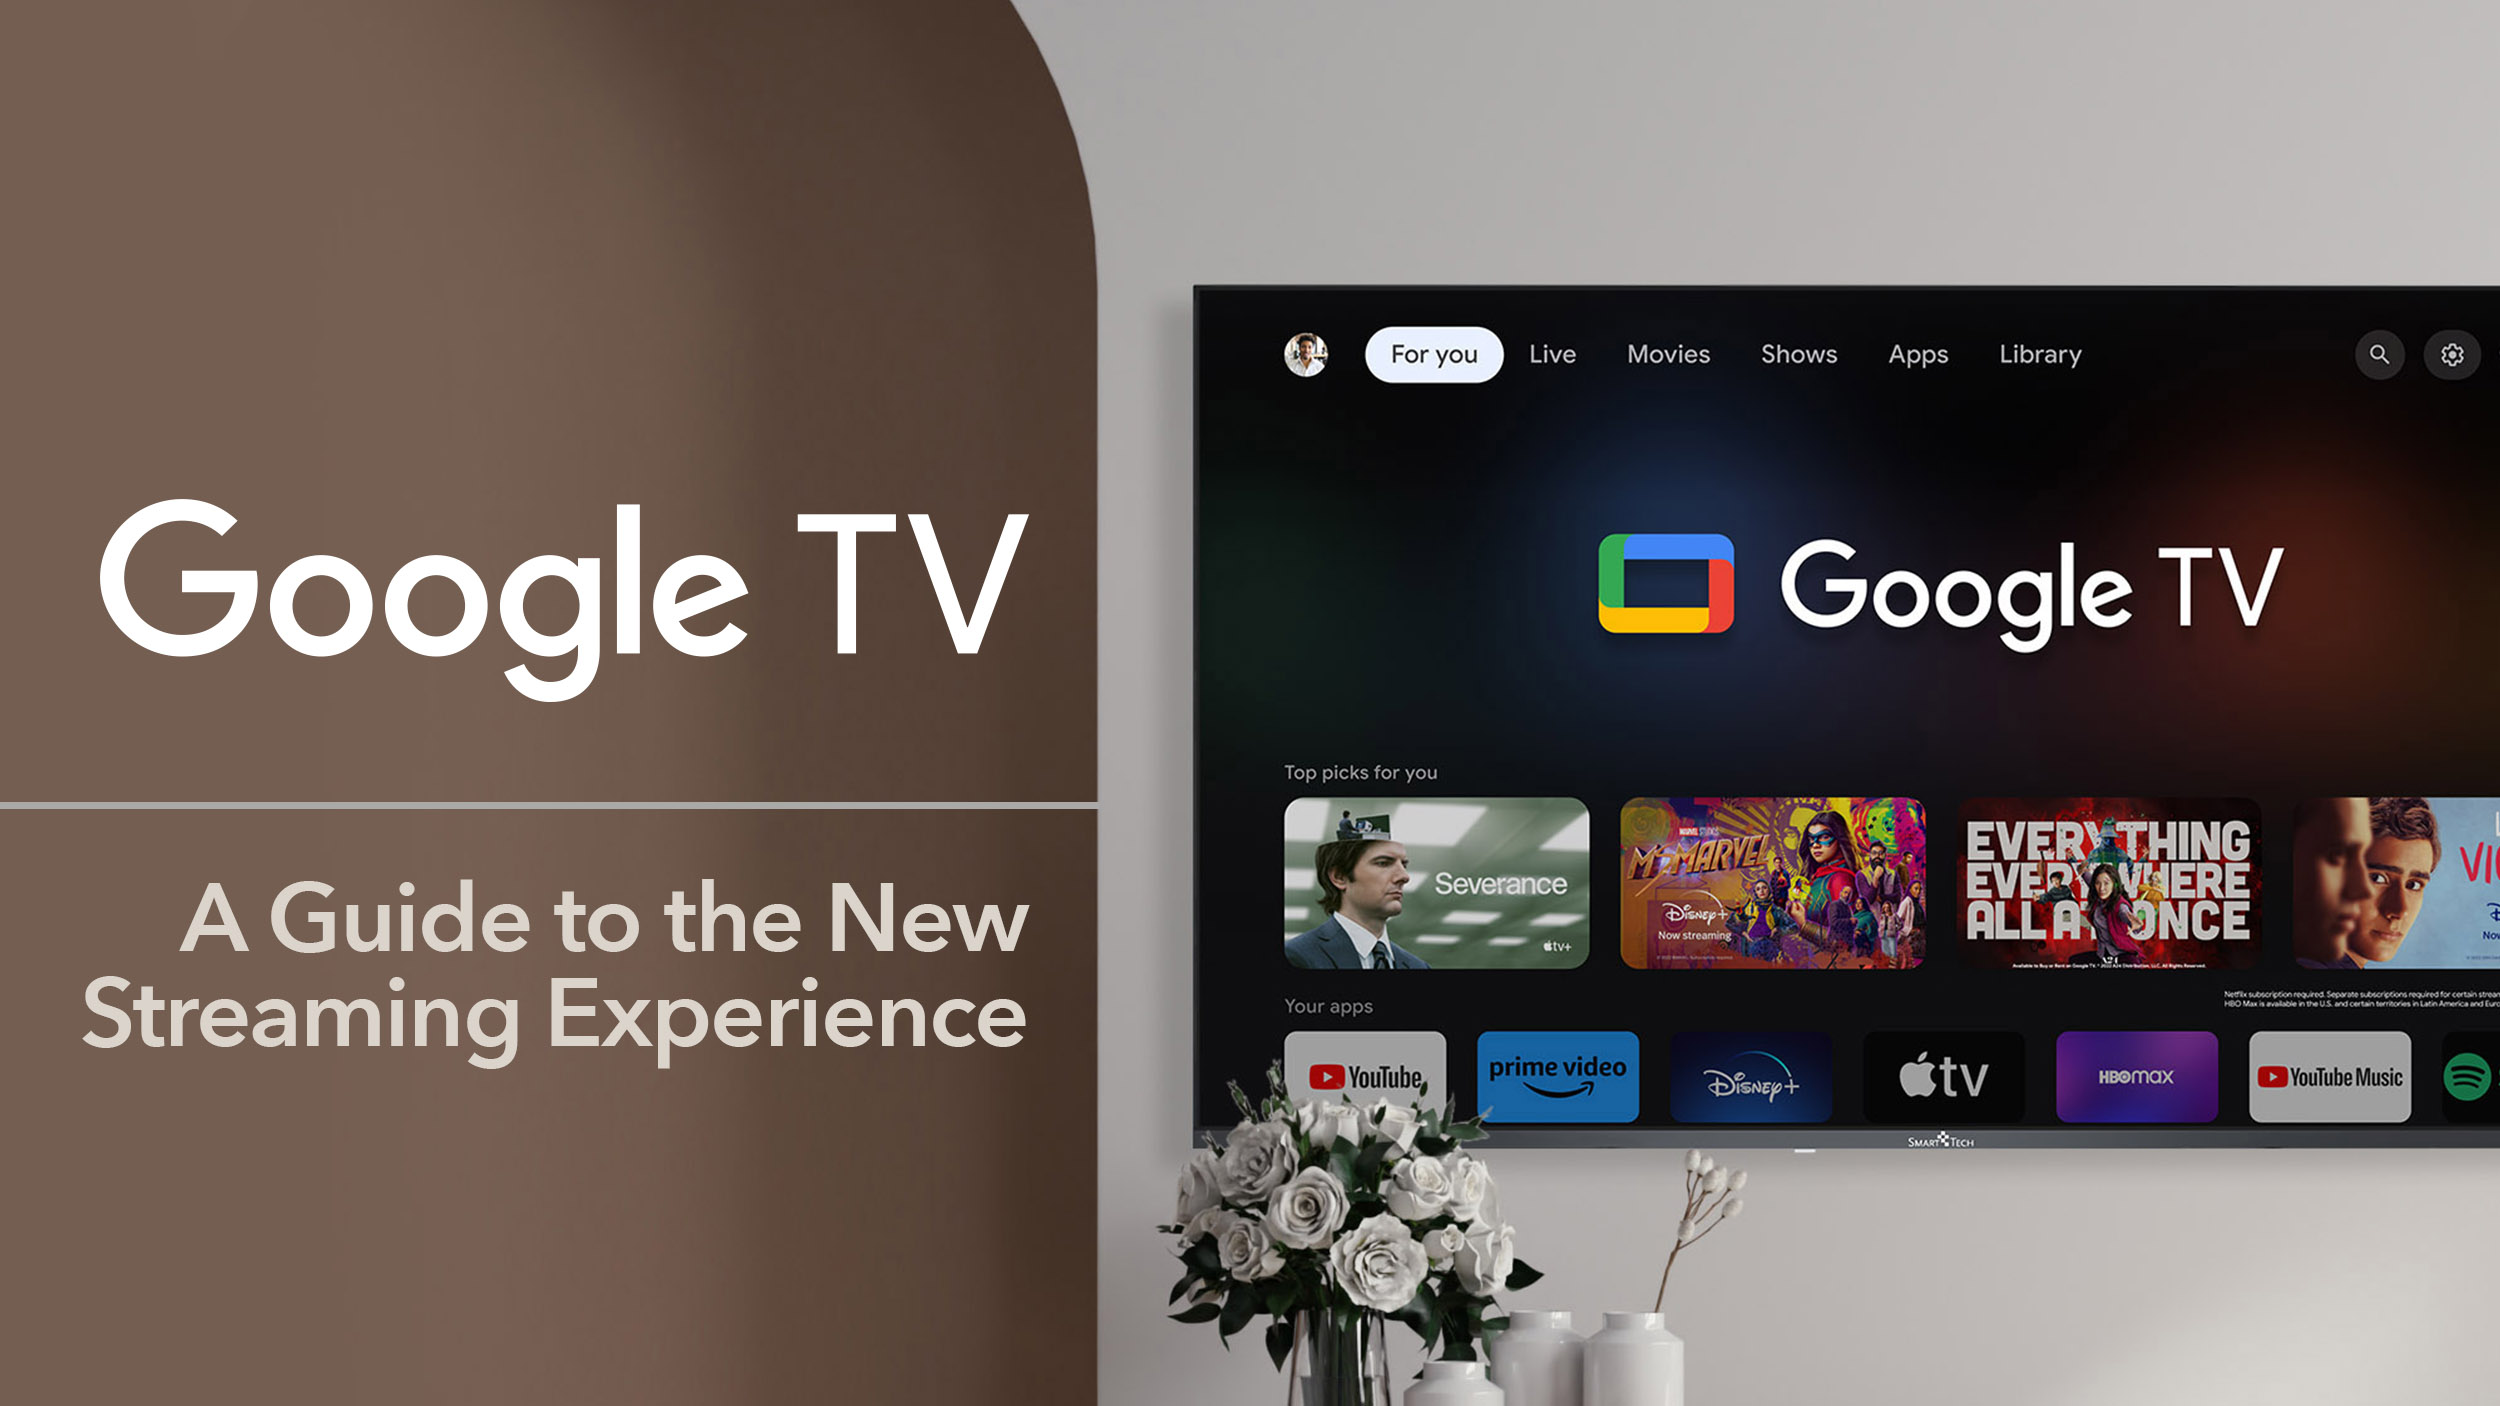 What You Need to Know About Google TV? A Guide to the New